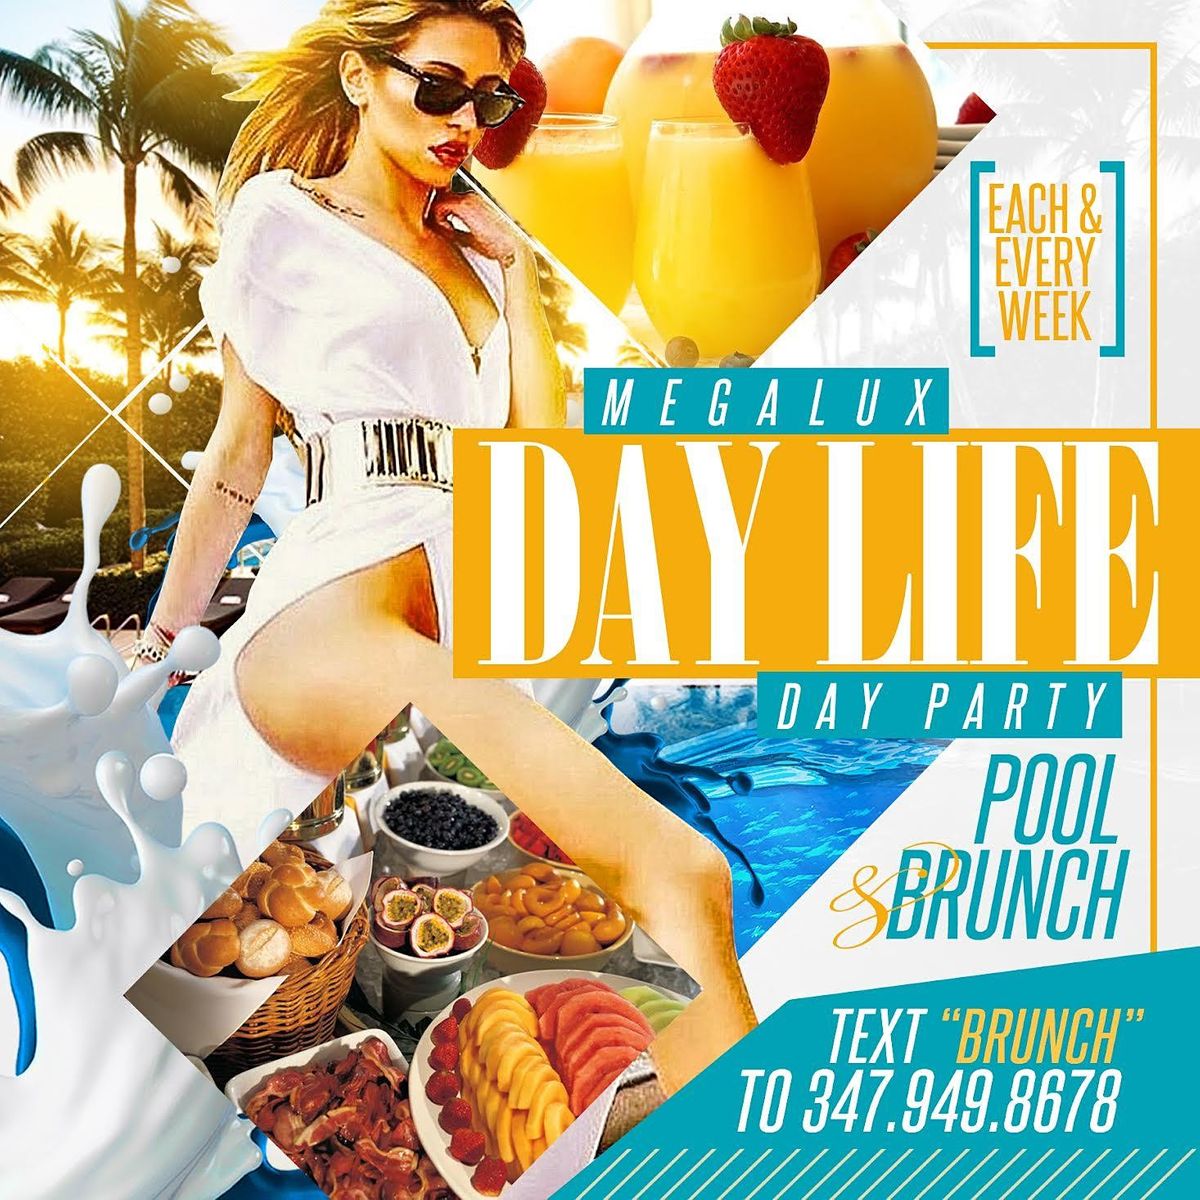 SOUTH BEACH BRUNCH & POOL PARTY